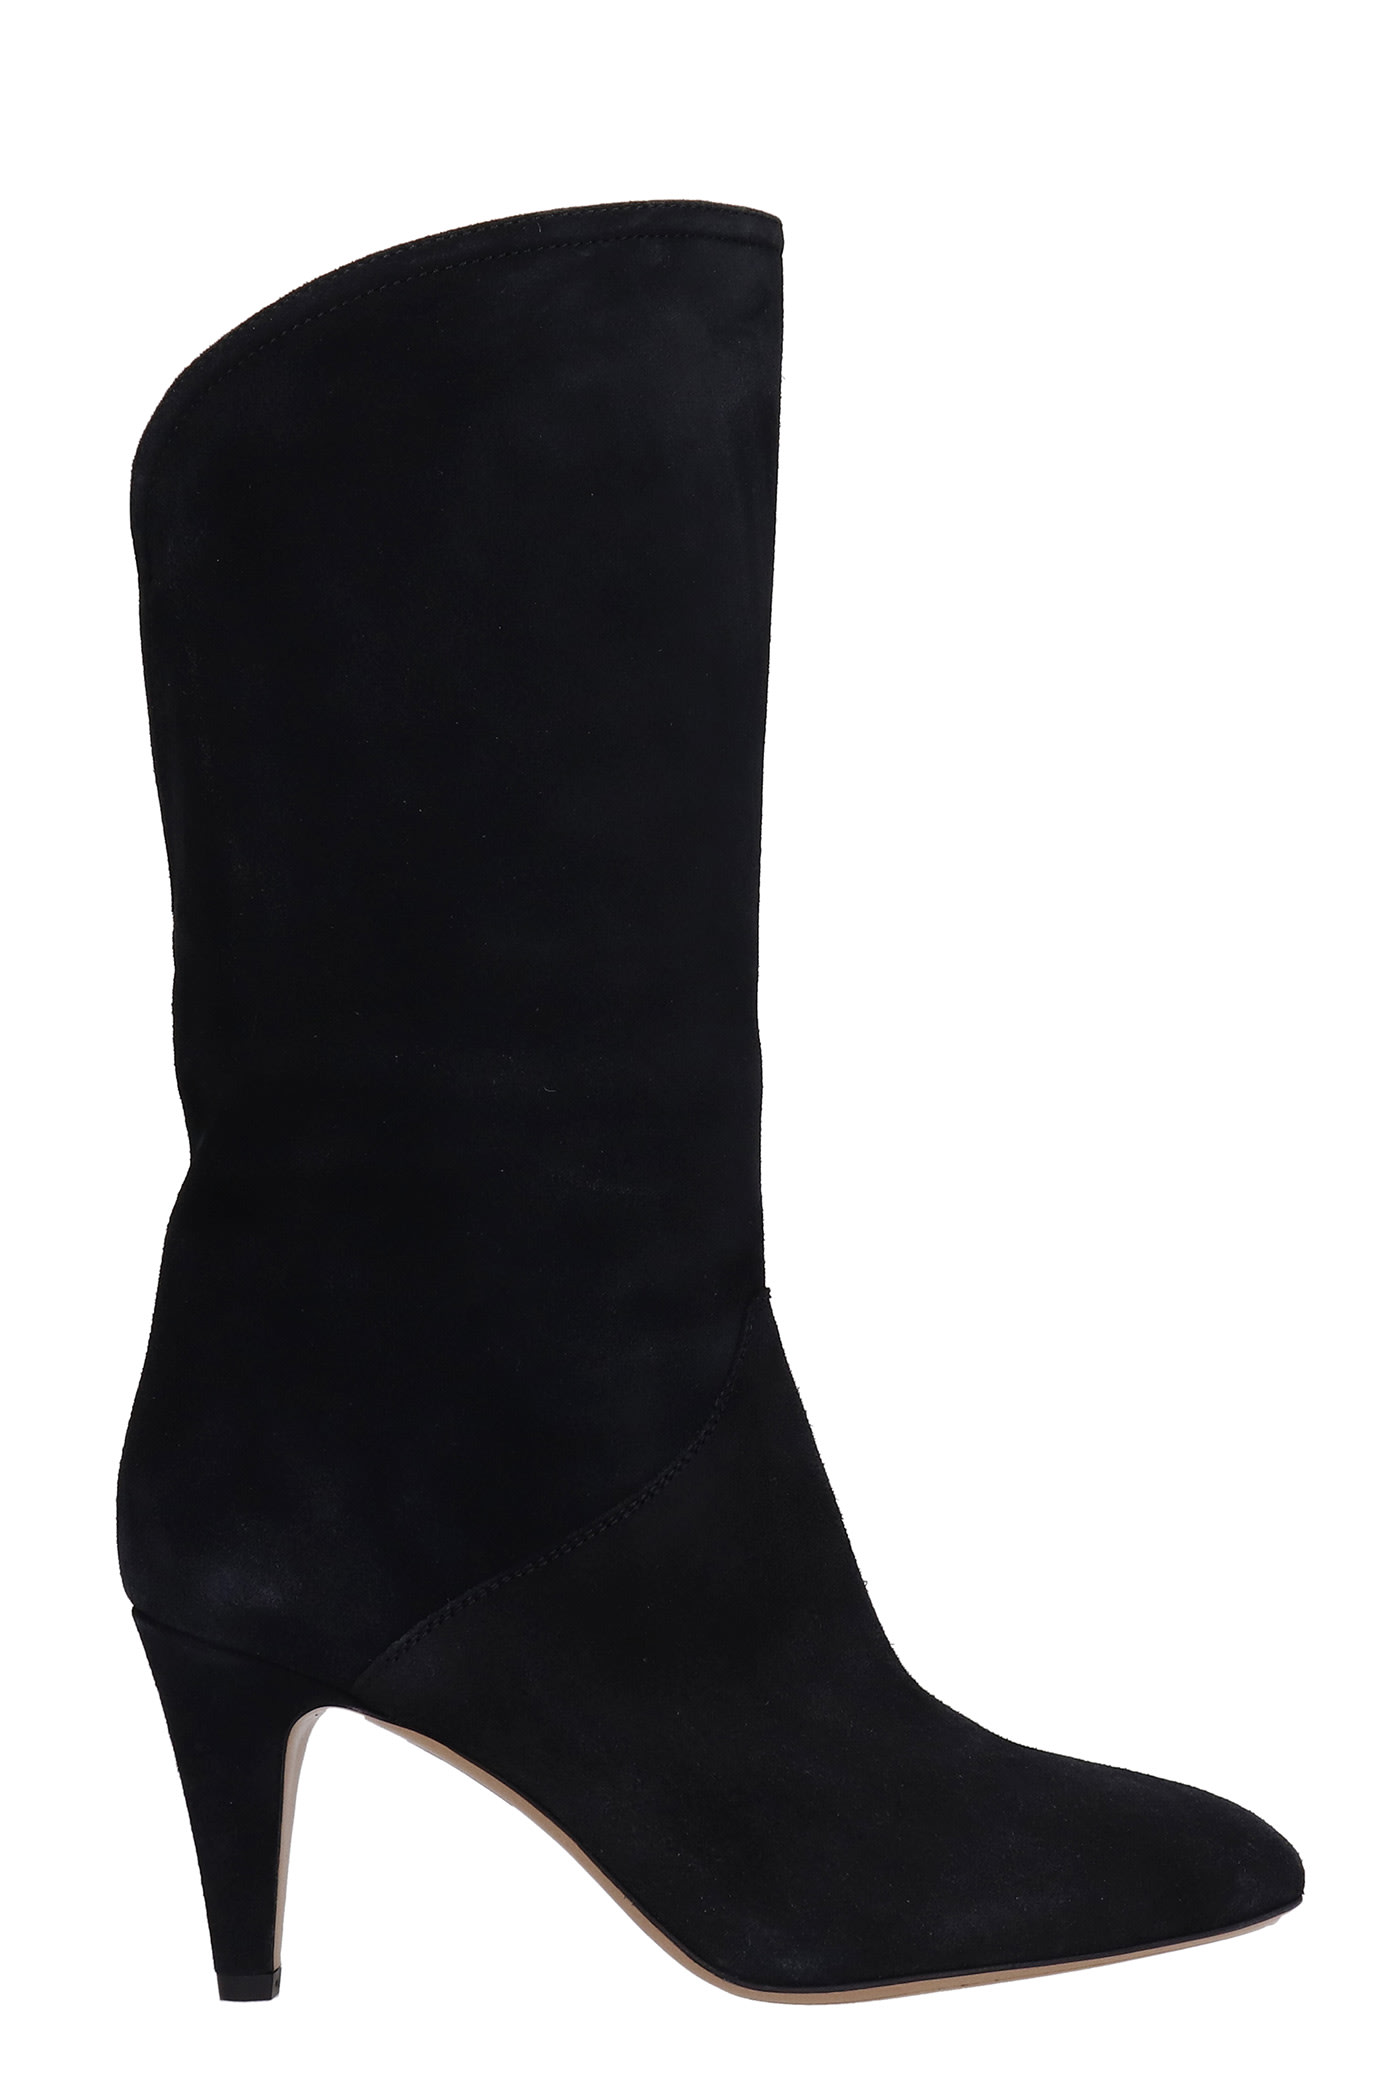 Isabel Marant Leye High Heels Ankle Boots In Black Suede